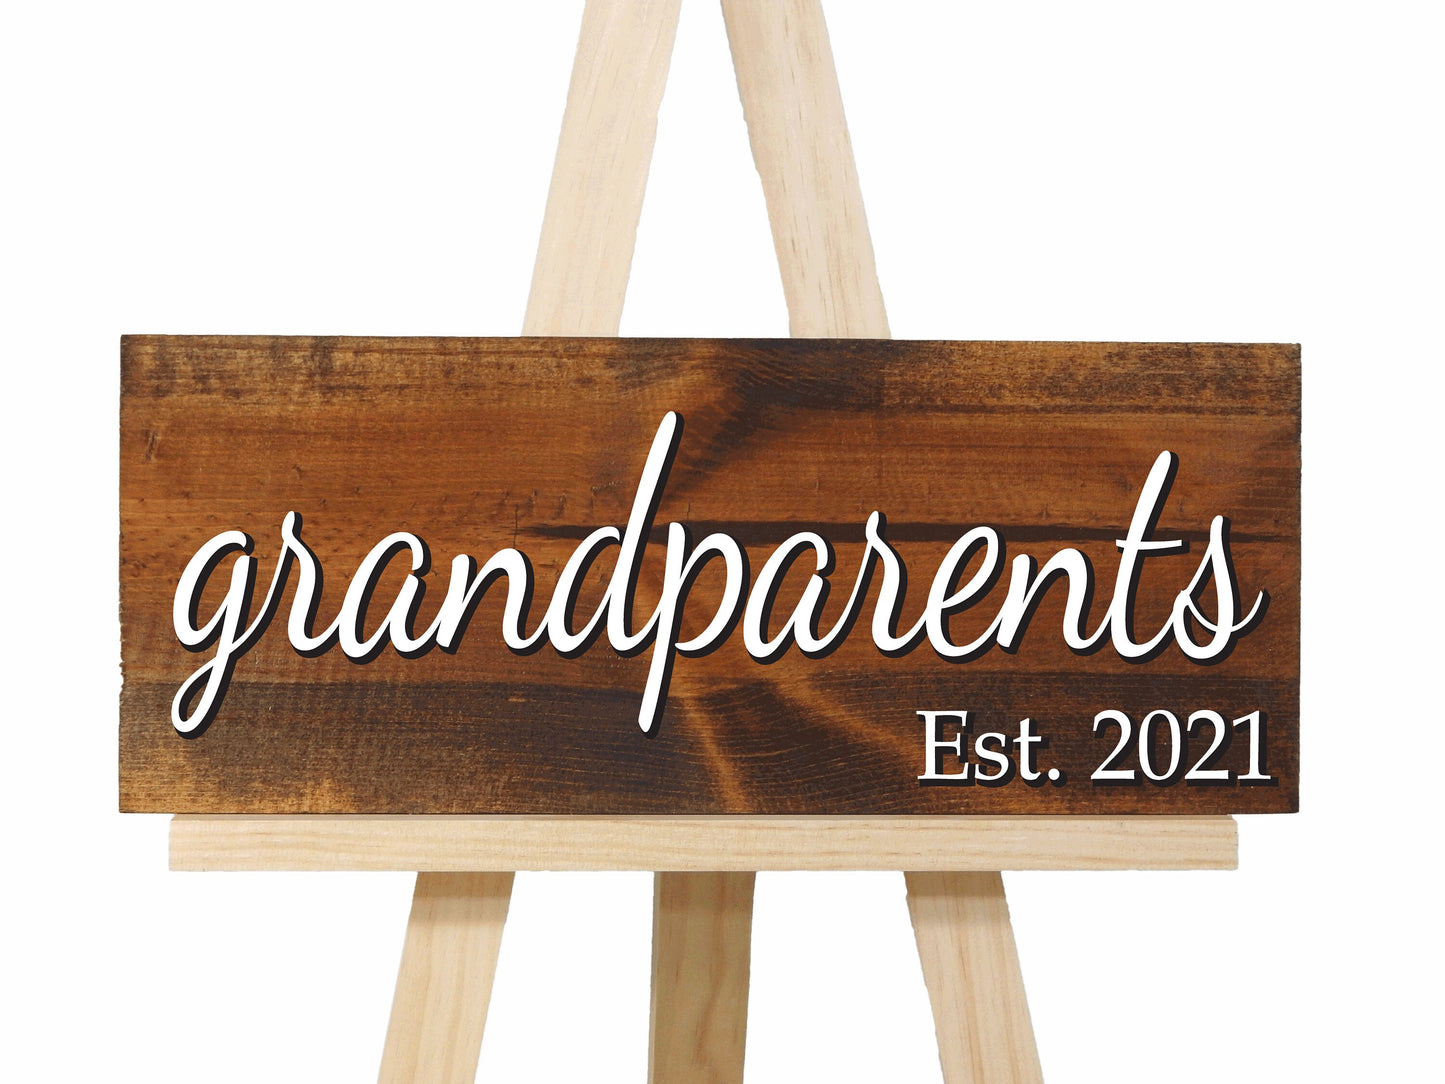 3D New grandparents gift, wood signs, established date grandpa gift, rustic home decor for nana and papa, Mother's Day gifts for Grandma